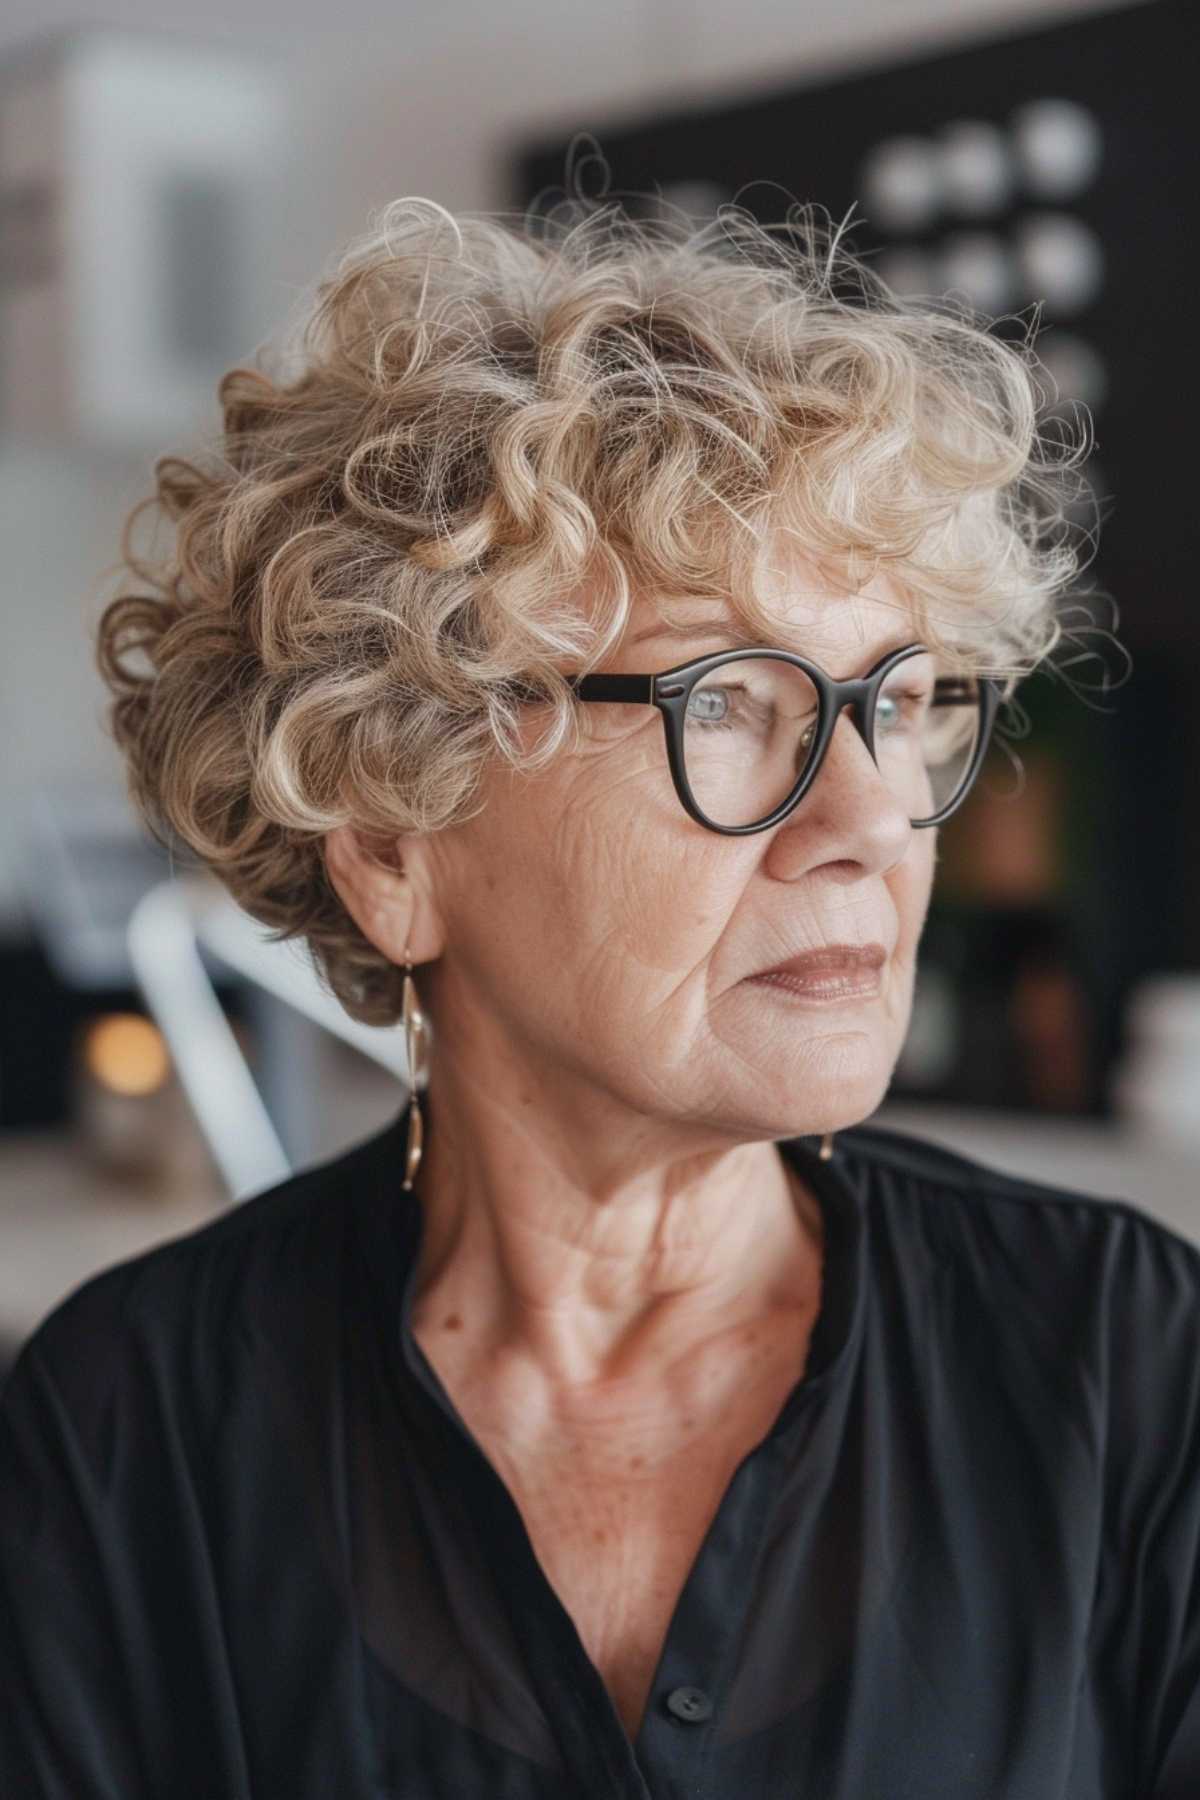 Natural curly pixie cut for older women with glasses.